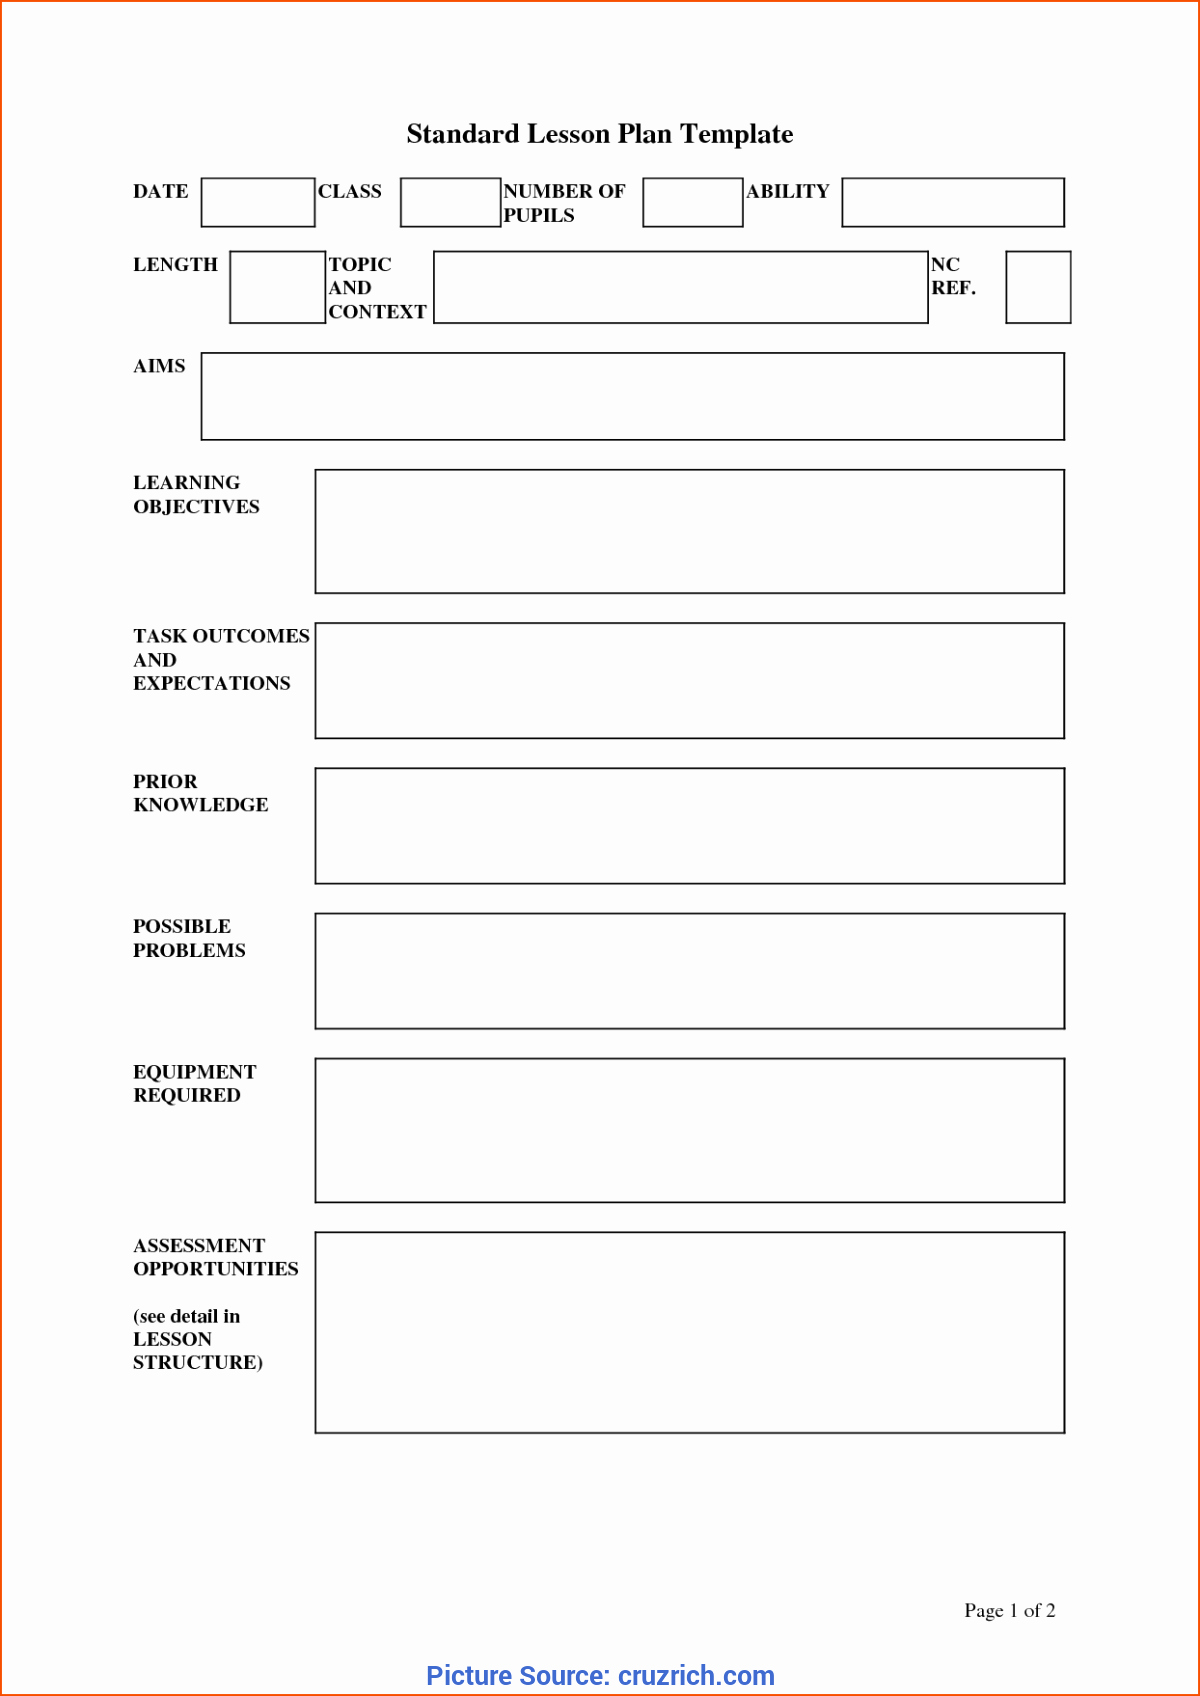 Physical Education Lesson Plan Template Elegant Plex Content and Language Objectives for Kindergarten